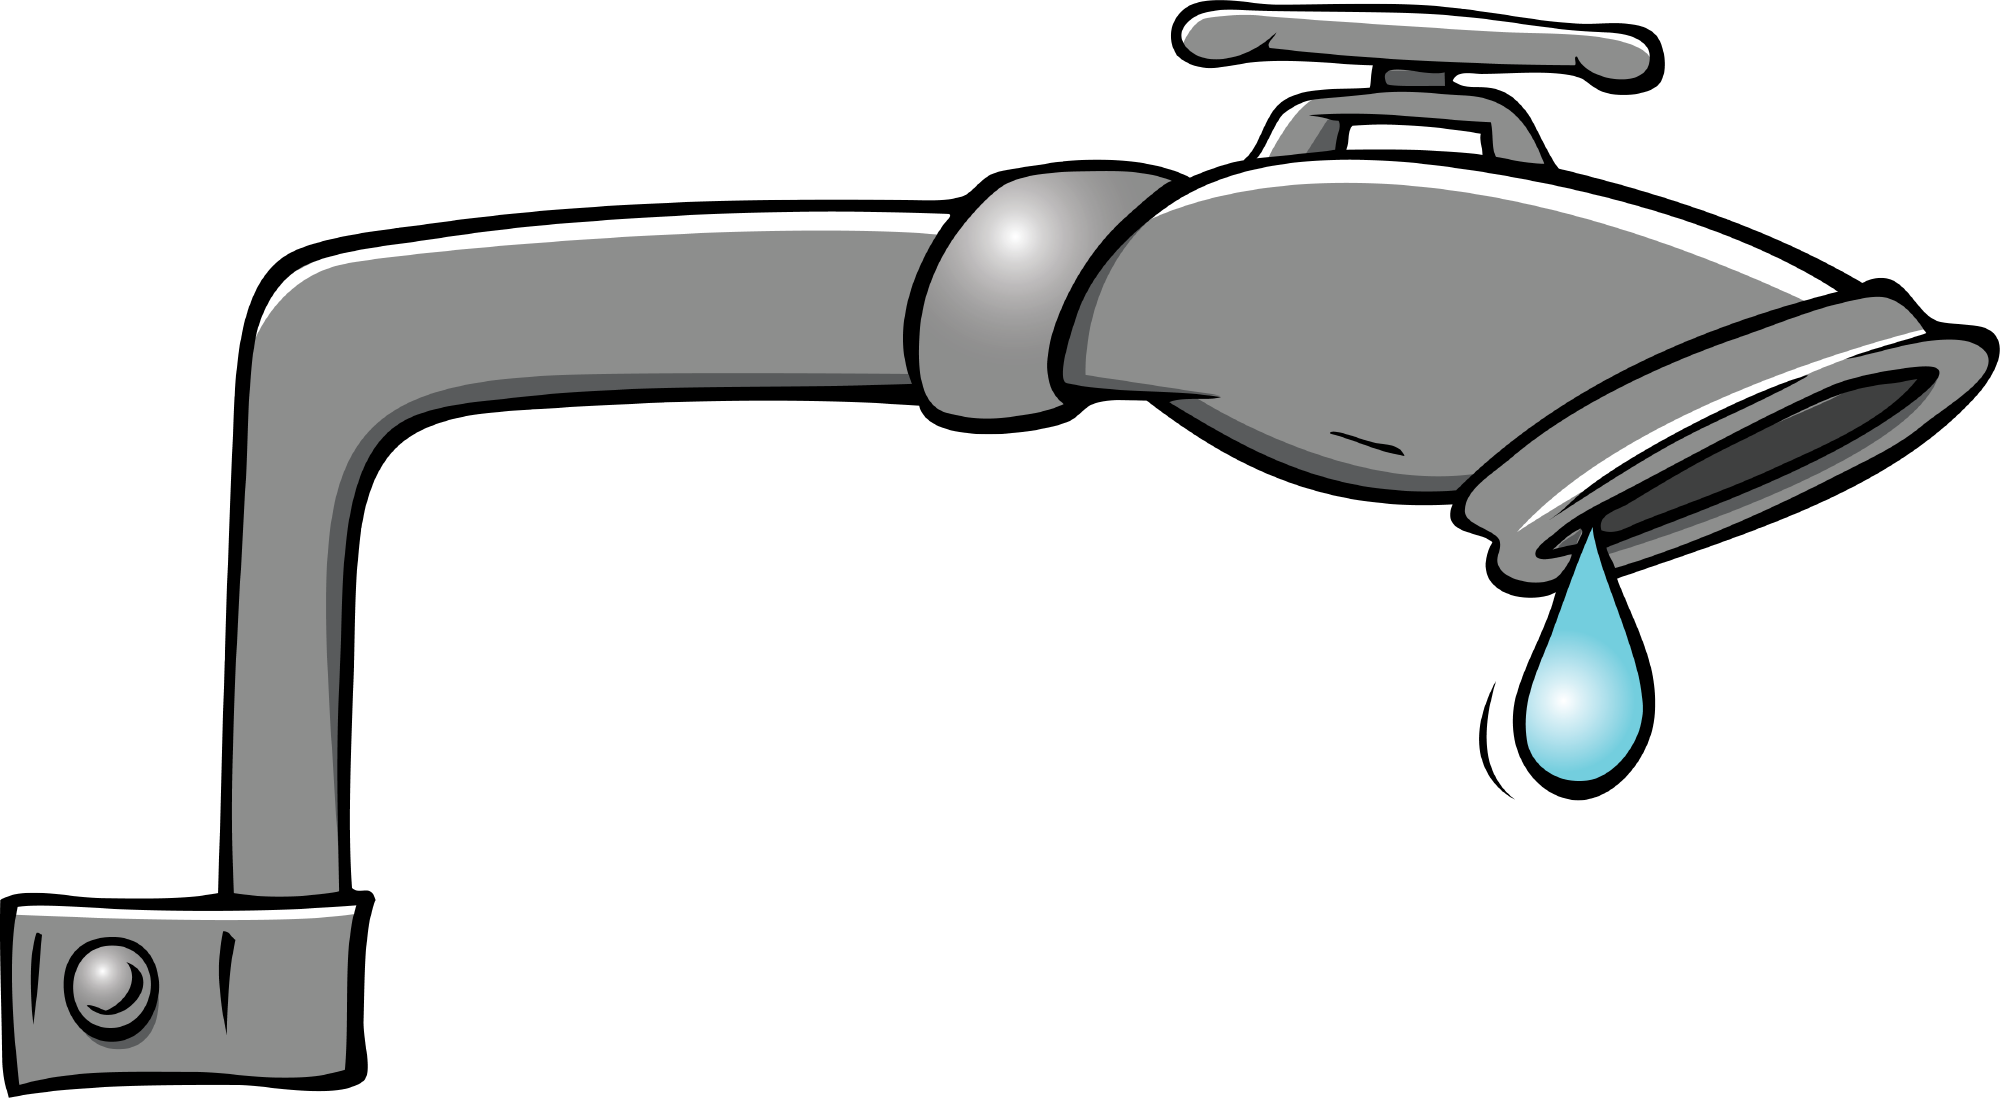 Faucet clipart cold water. Modern adornment sink ideas